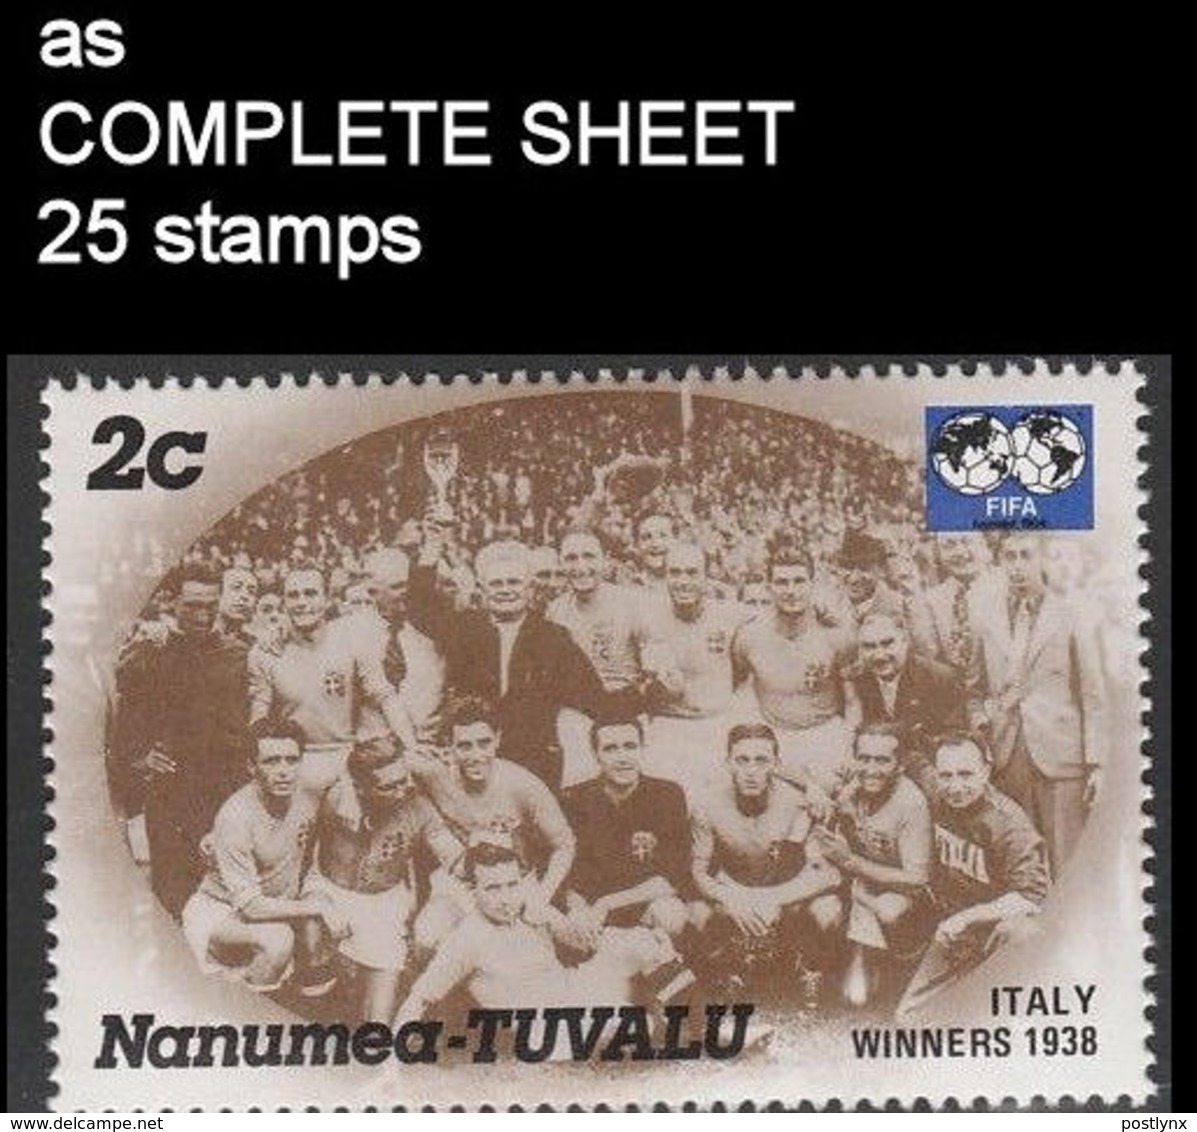 CV:€5.56 TUVALU-Nanumea 1986 World Cup Mexico France Winner Italy 1938 2c COMPLETE SHEET:25 Stamps - 1938 – Frankreich